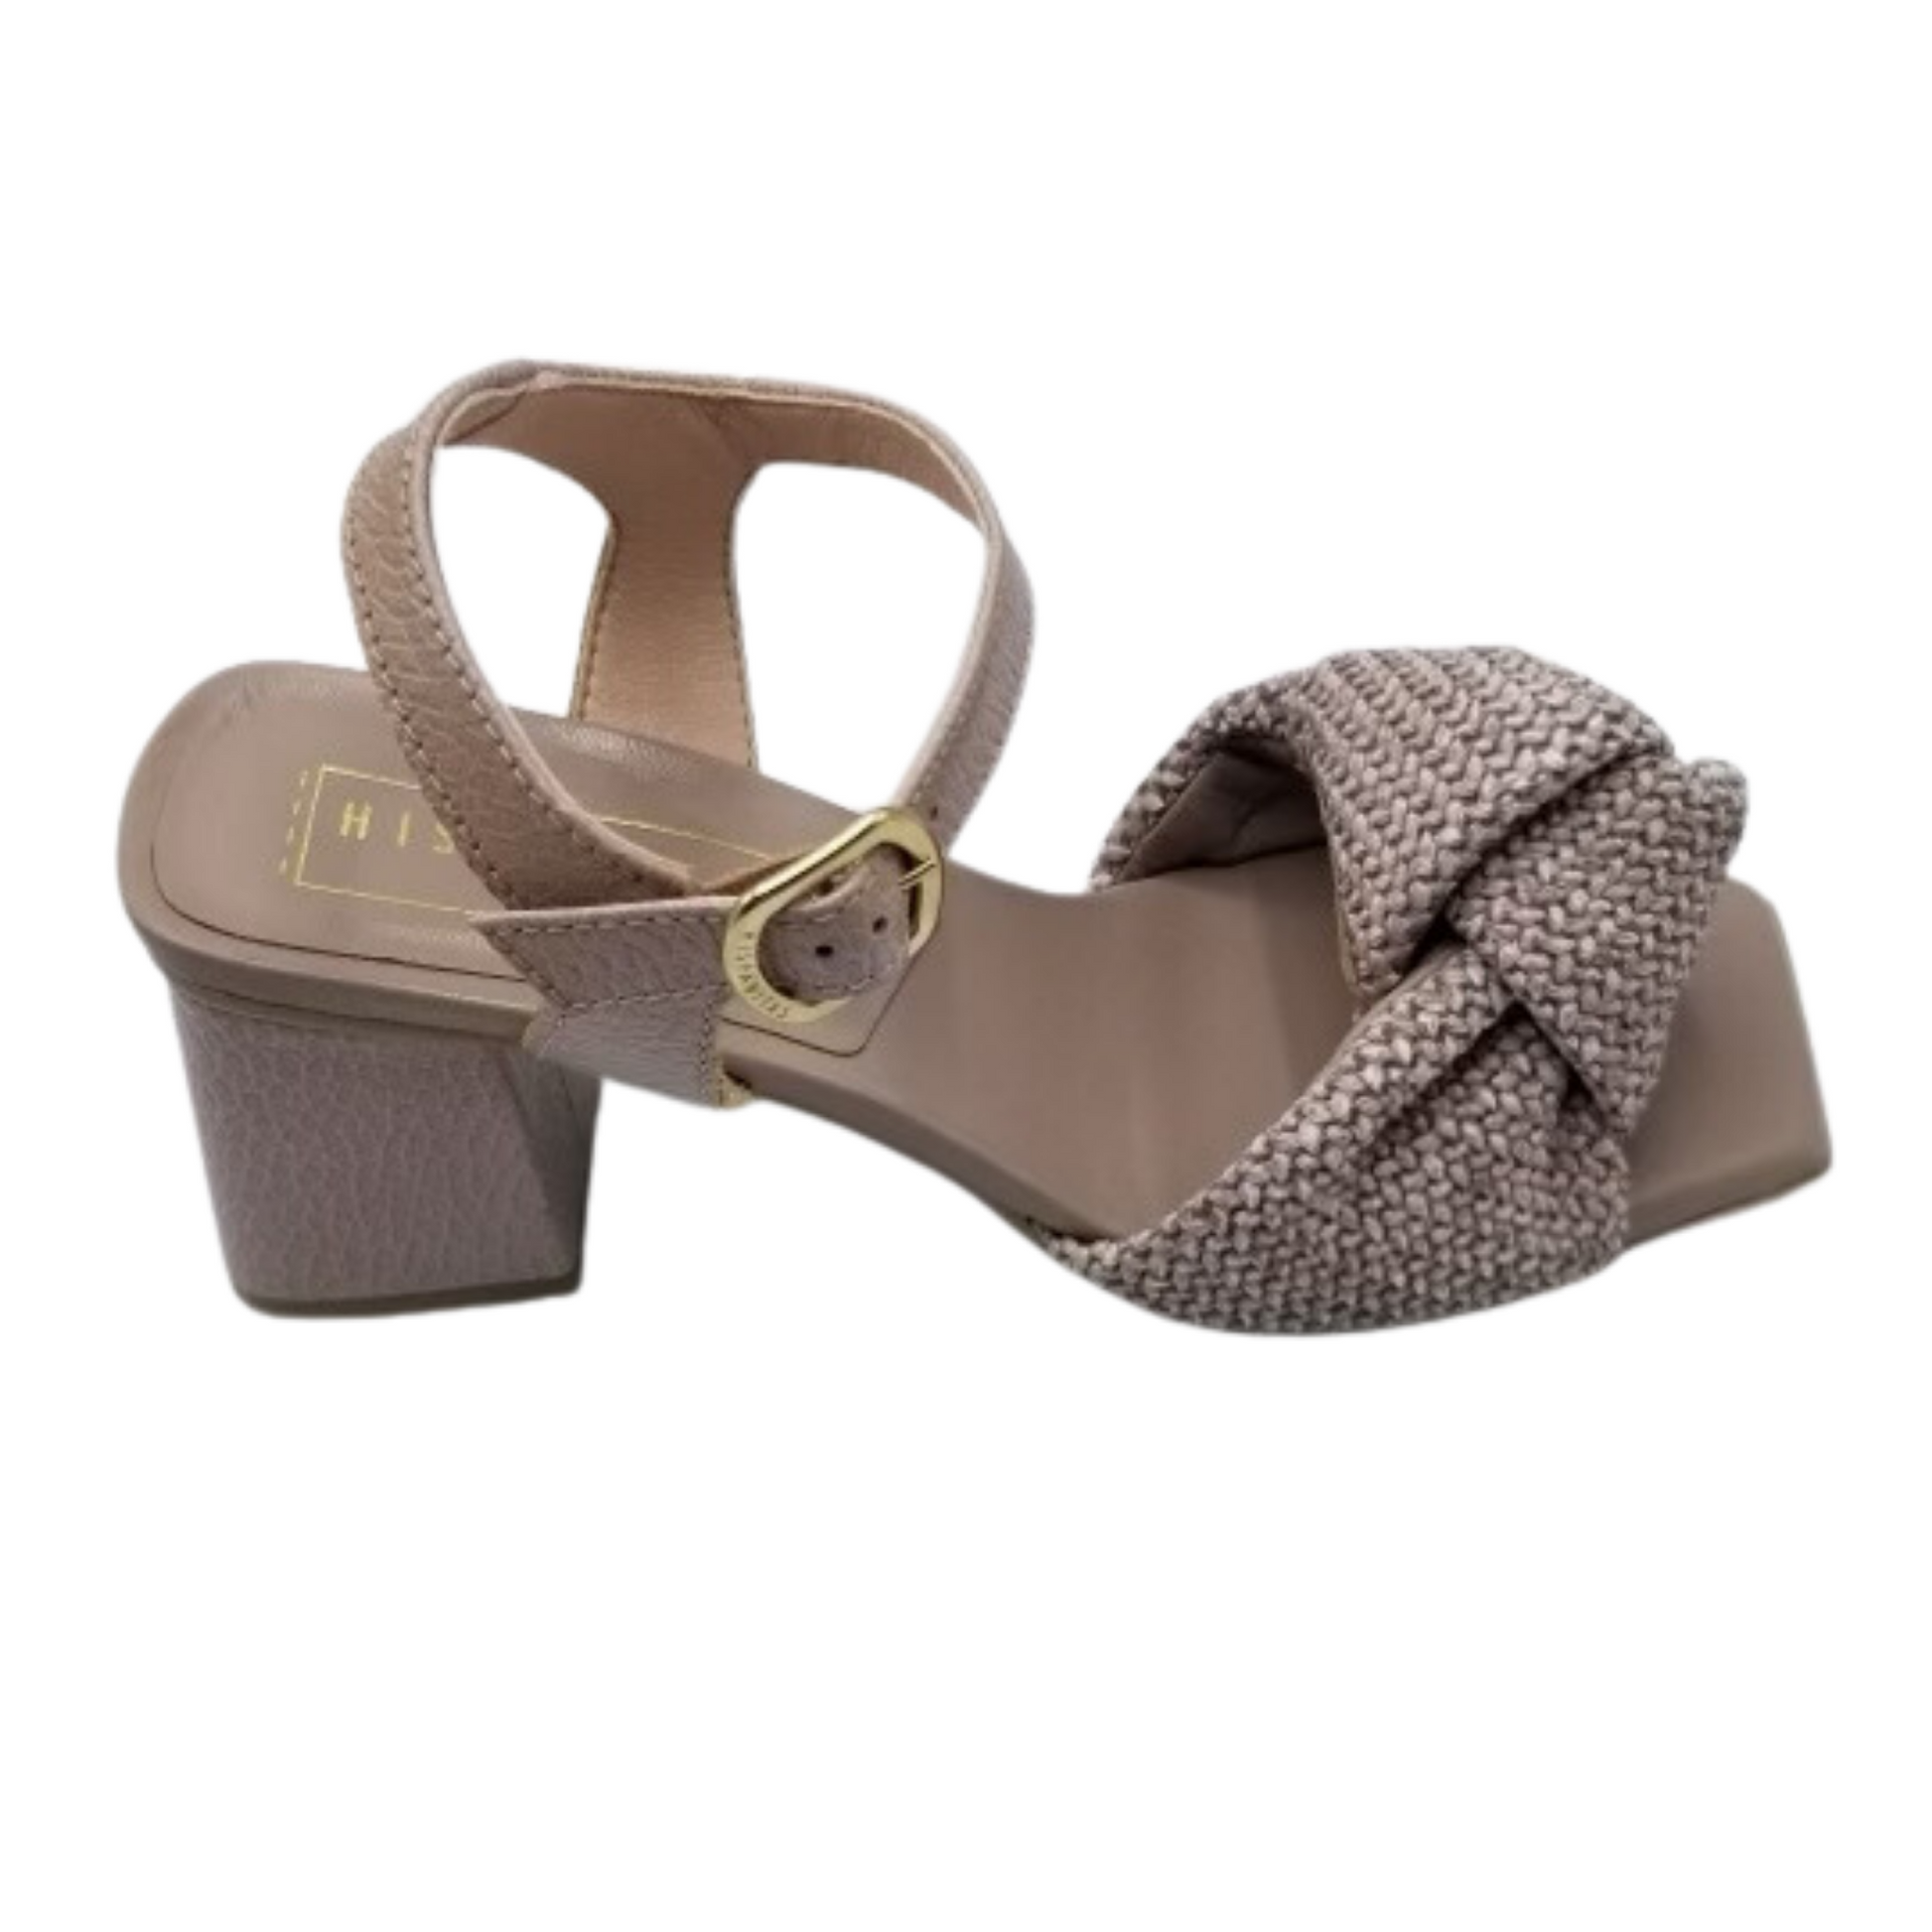 Outside view of right shoe.  Taupe leather with heavy knotted detail at forefoot.  Heel and ankle strap.  Adjustable buckle